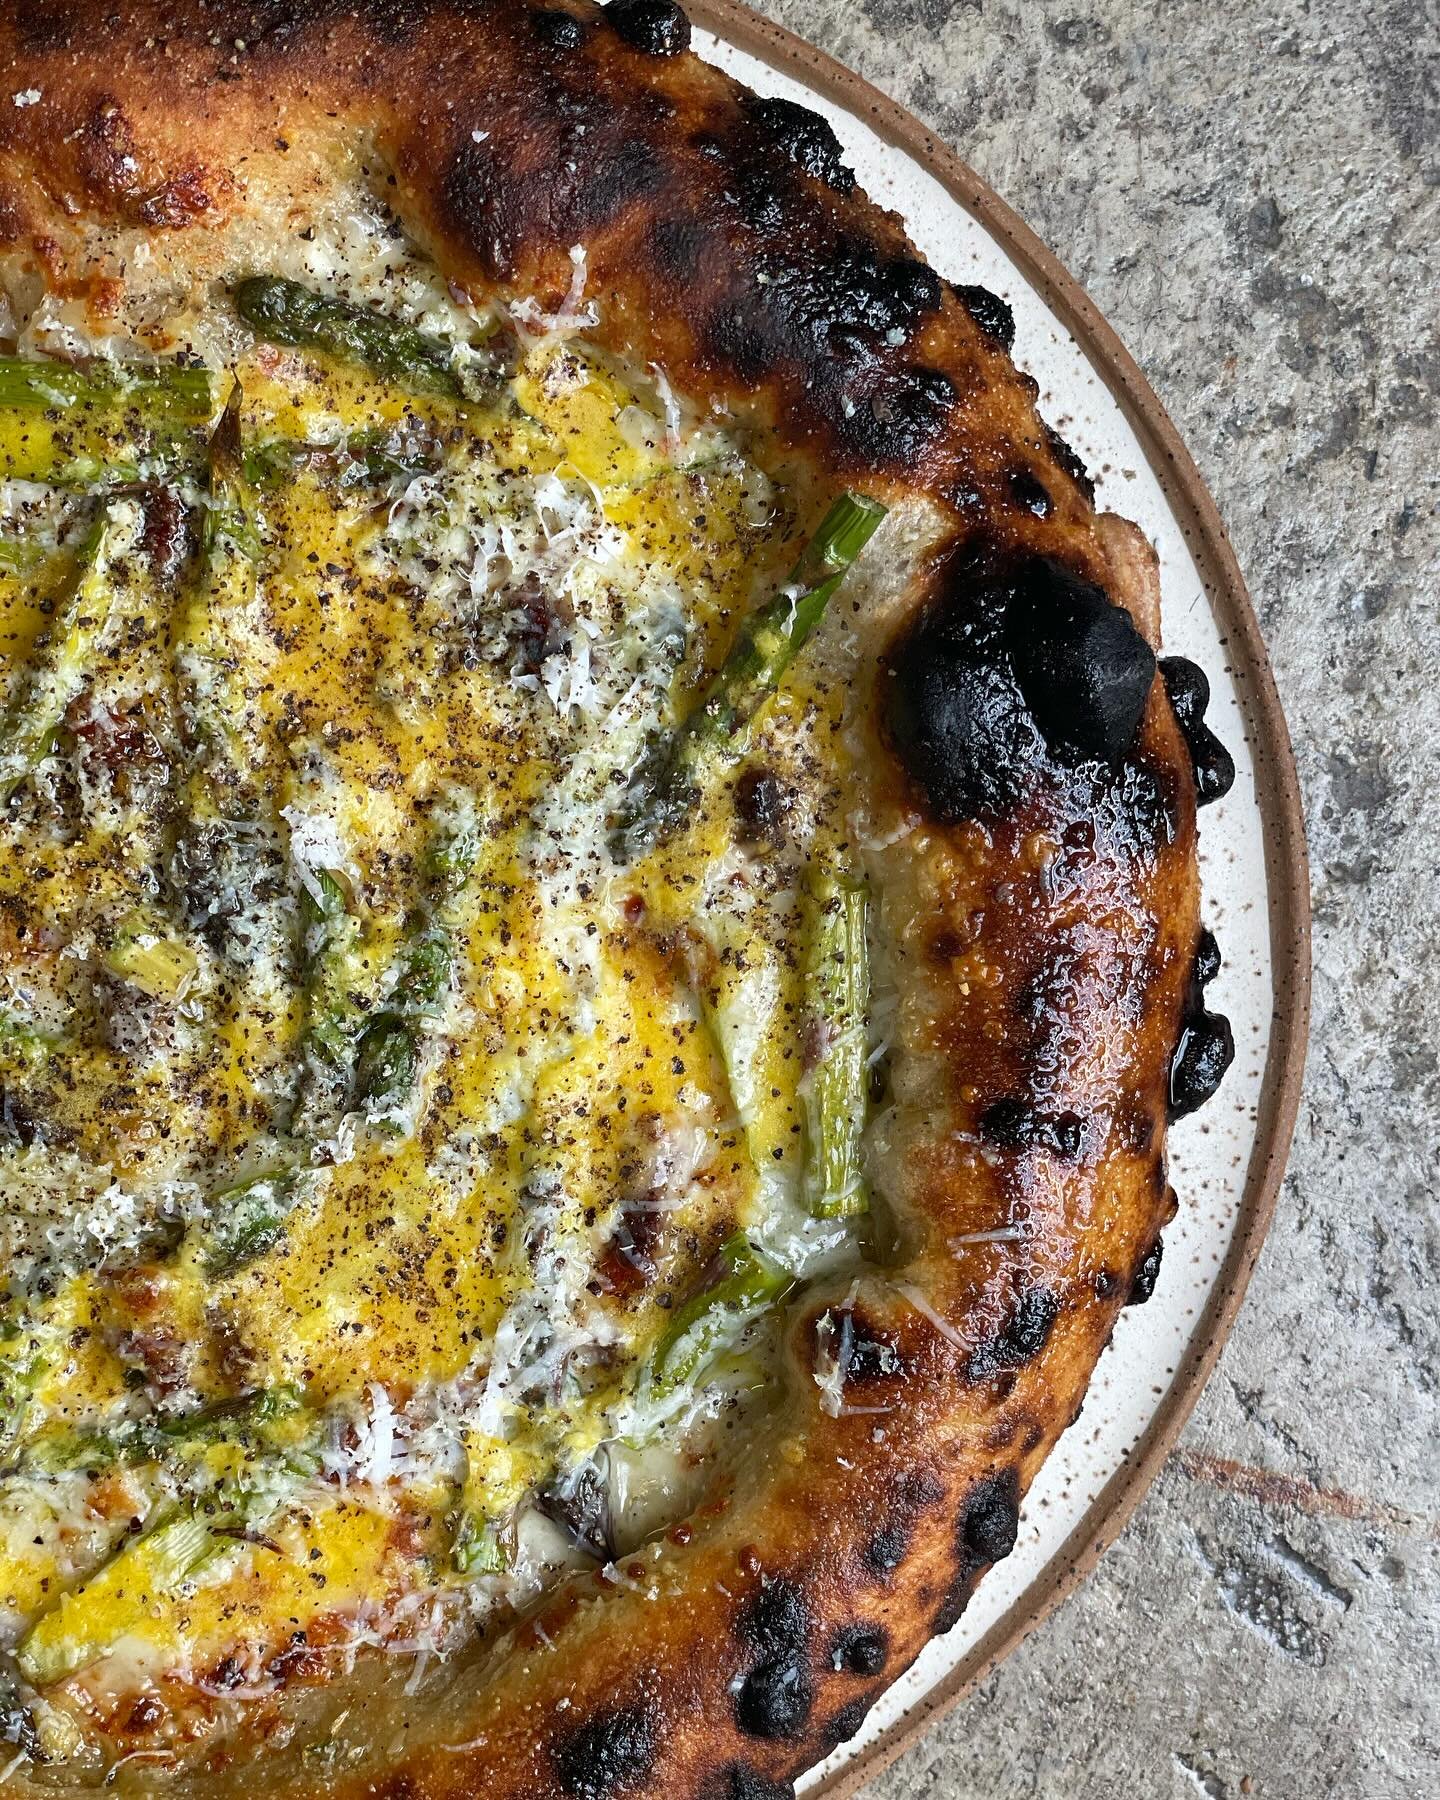 We have a new asparagus pizza on this weekend.  Not sure how much longer it will be around, so don&rsquo;t sleep on it.  It should seem familiar to you, as it&rsquo;s inspired by a delicious classic pasta dish.  Also, soft serve and olive oil cake to